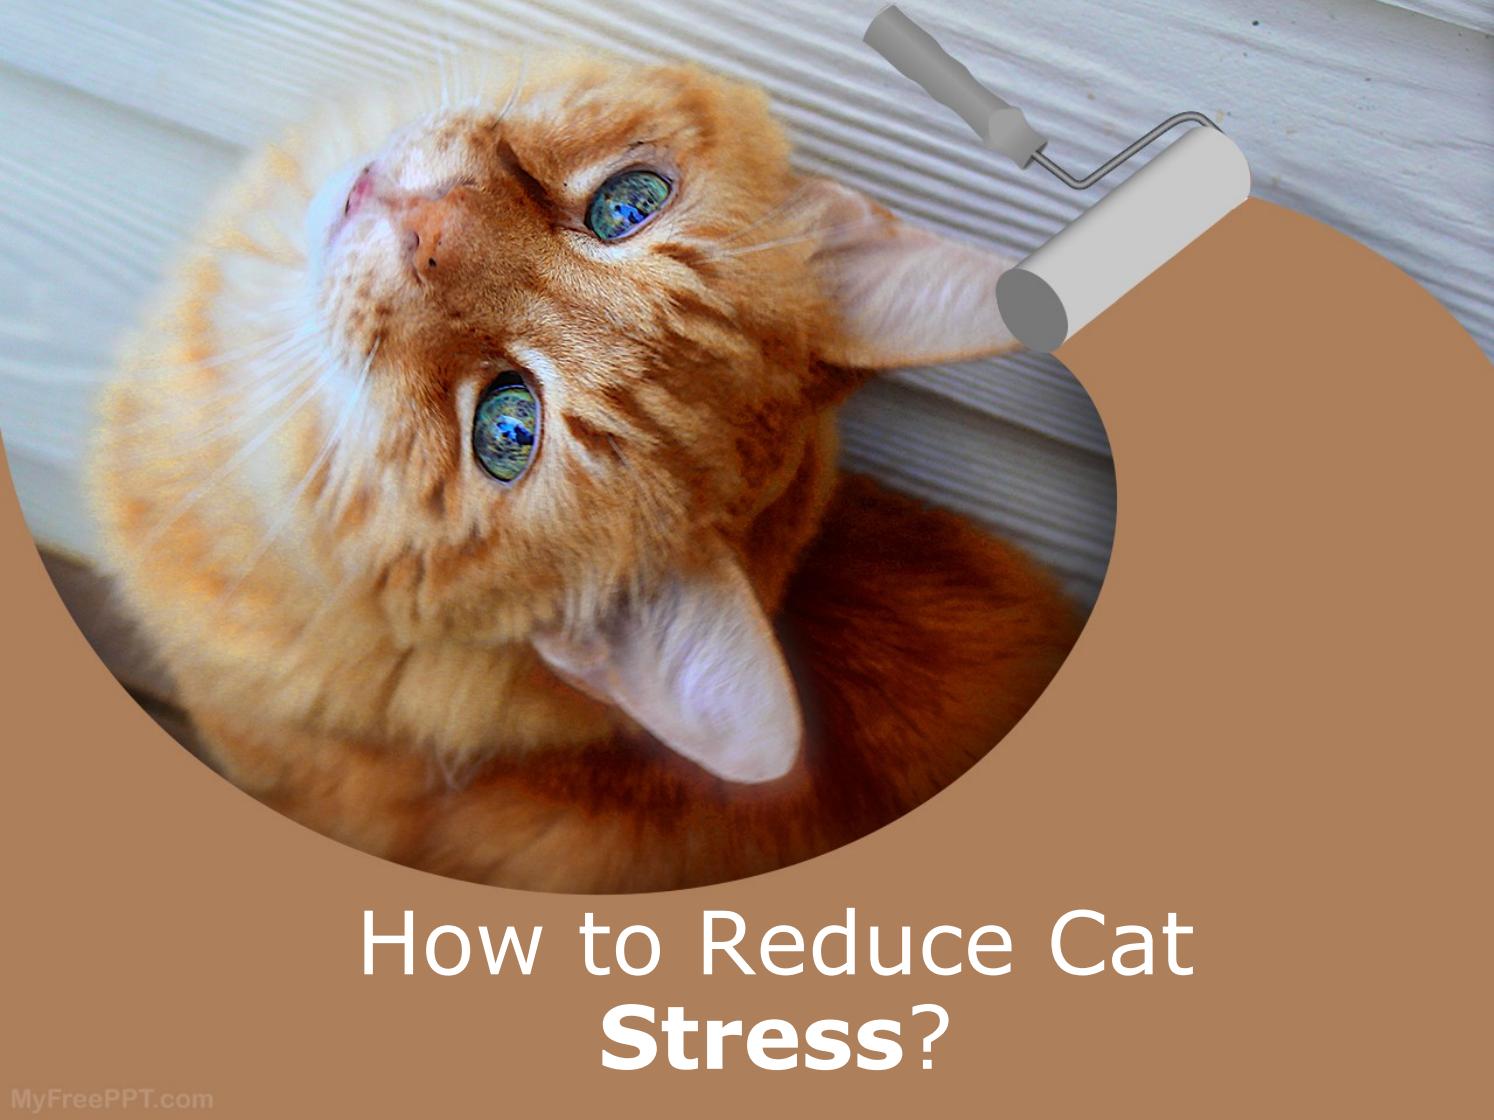 How to Reduce Cat Stress? by relaxmycat